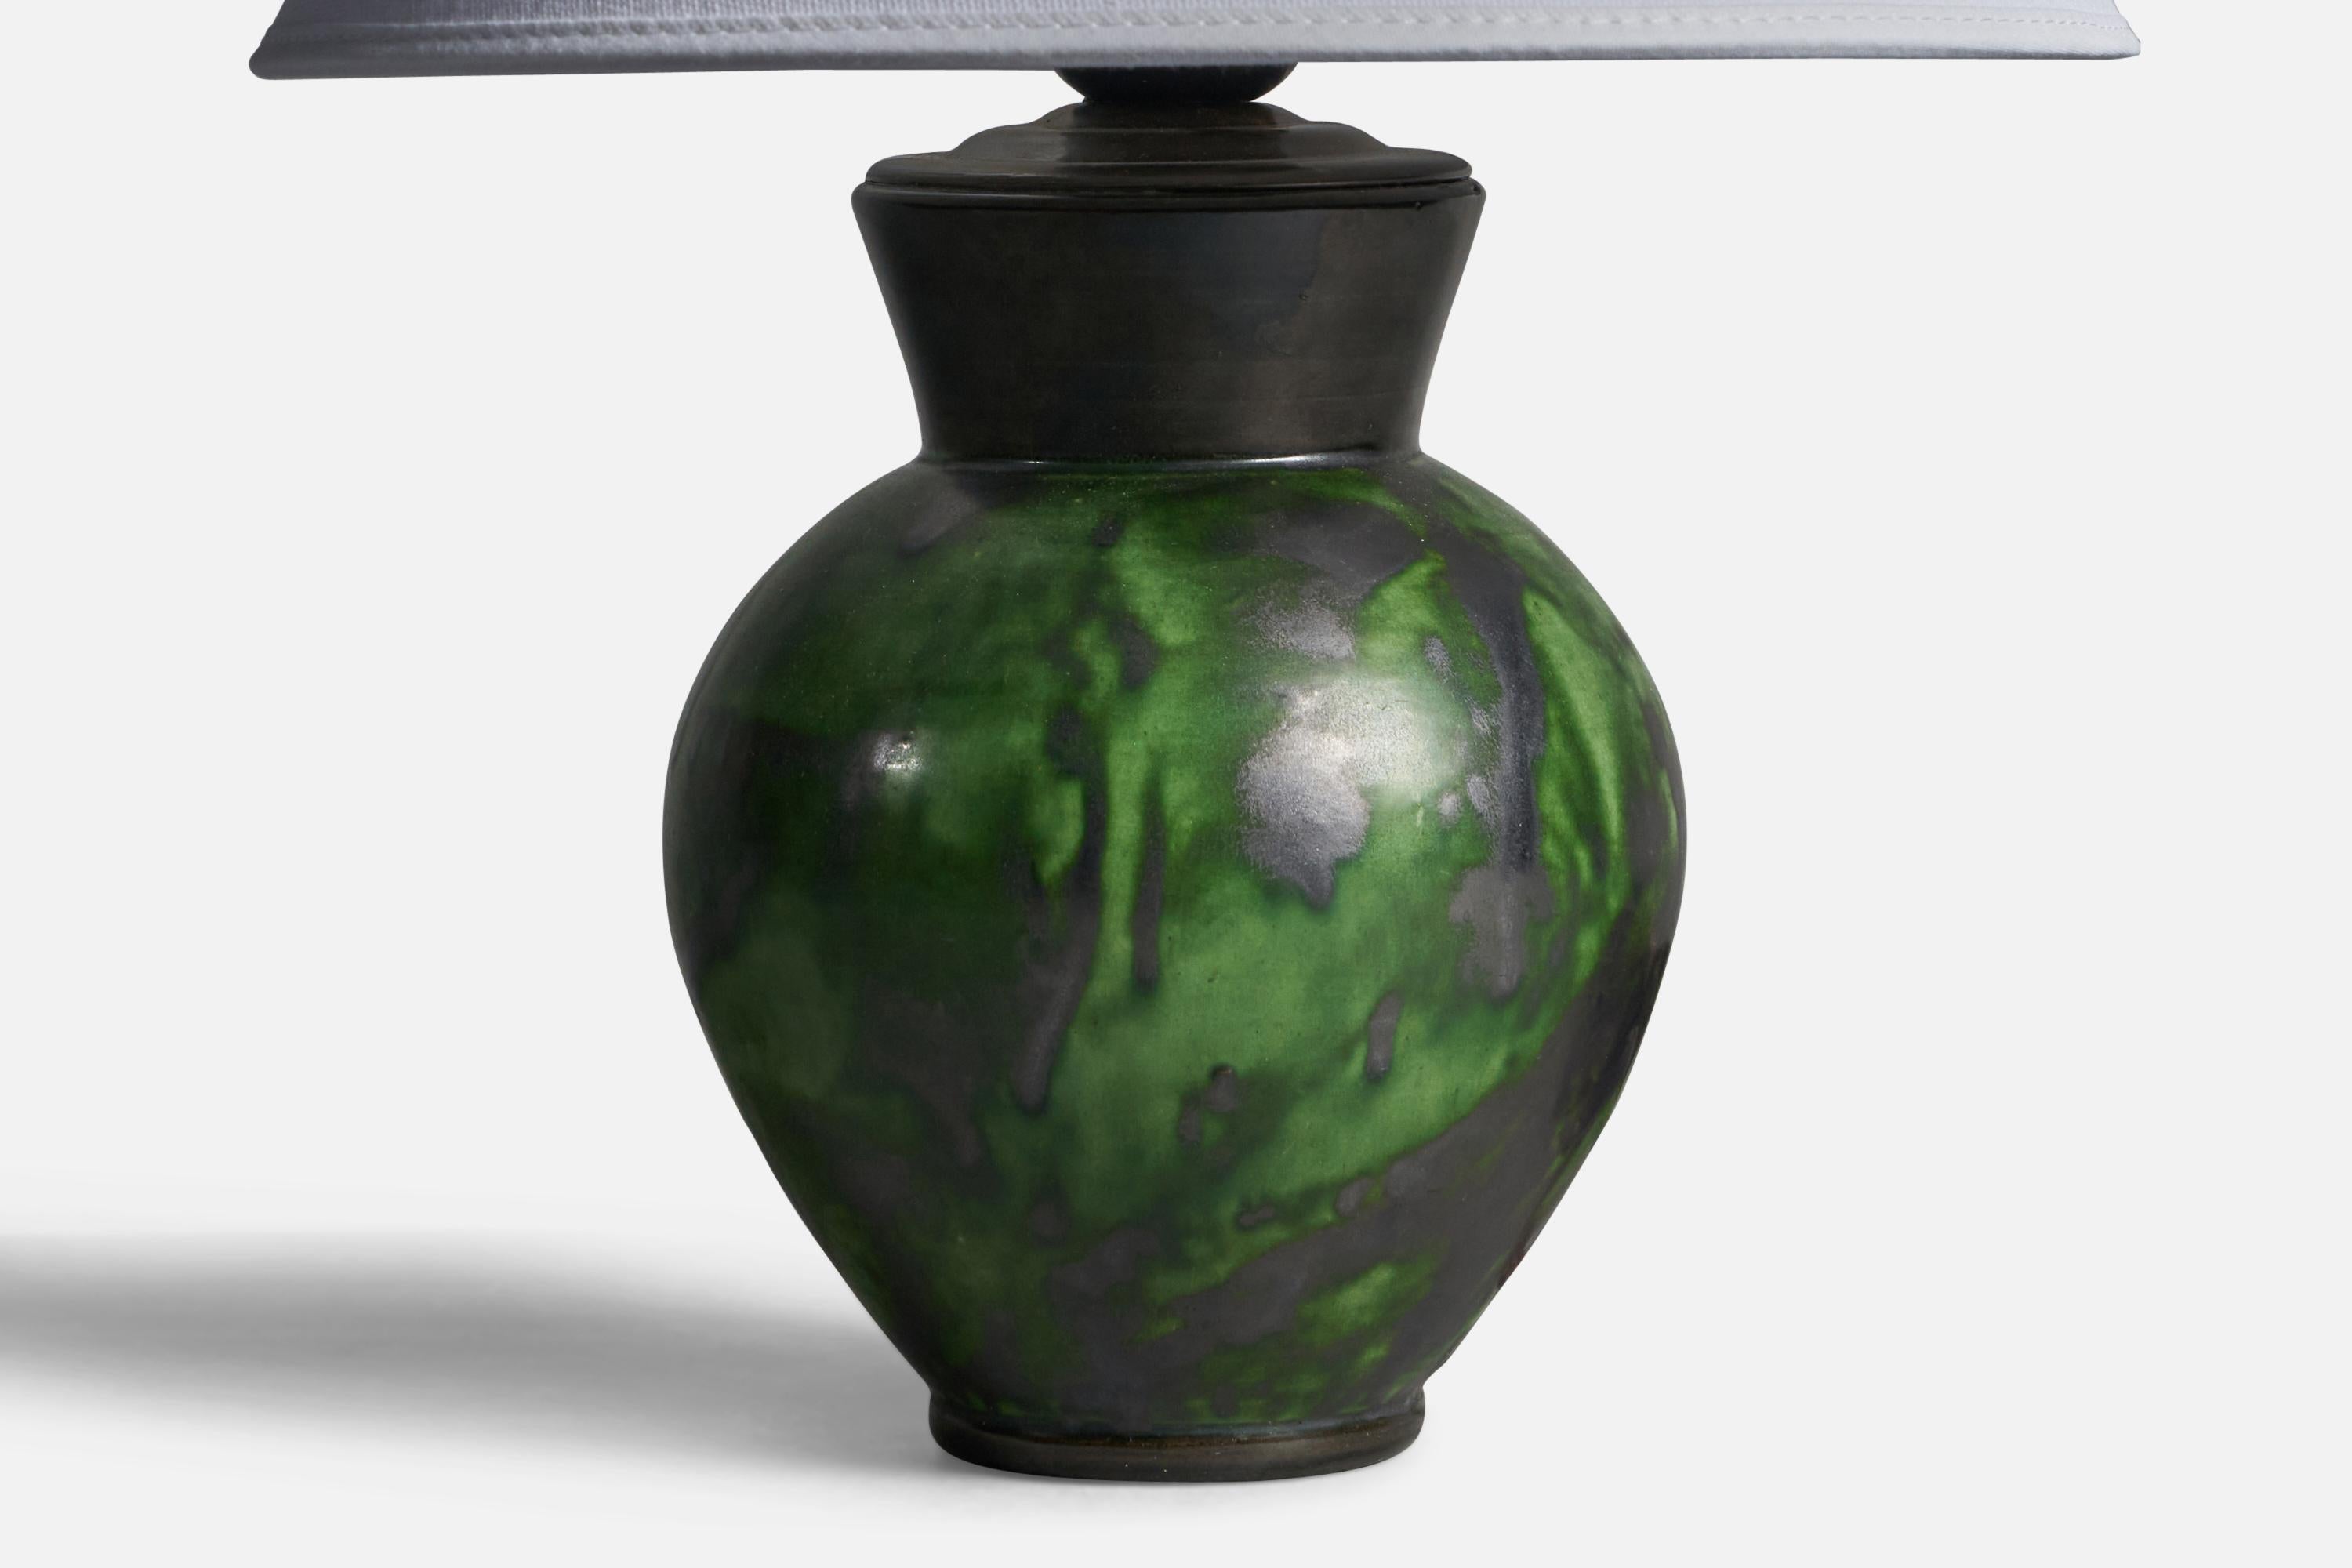 A green-glazed earthenware table lamp designed by Erik Mornils and produced by Nittsjö, Sweden, 1930s.

Dimensions of Lamp (inches): 9.5